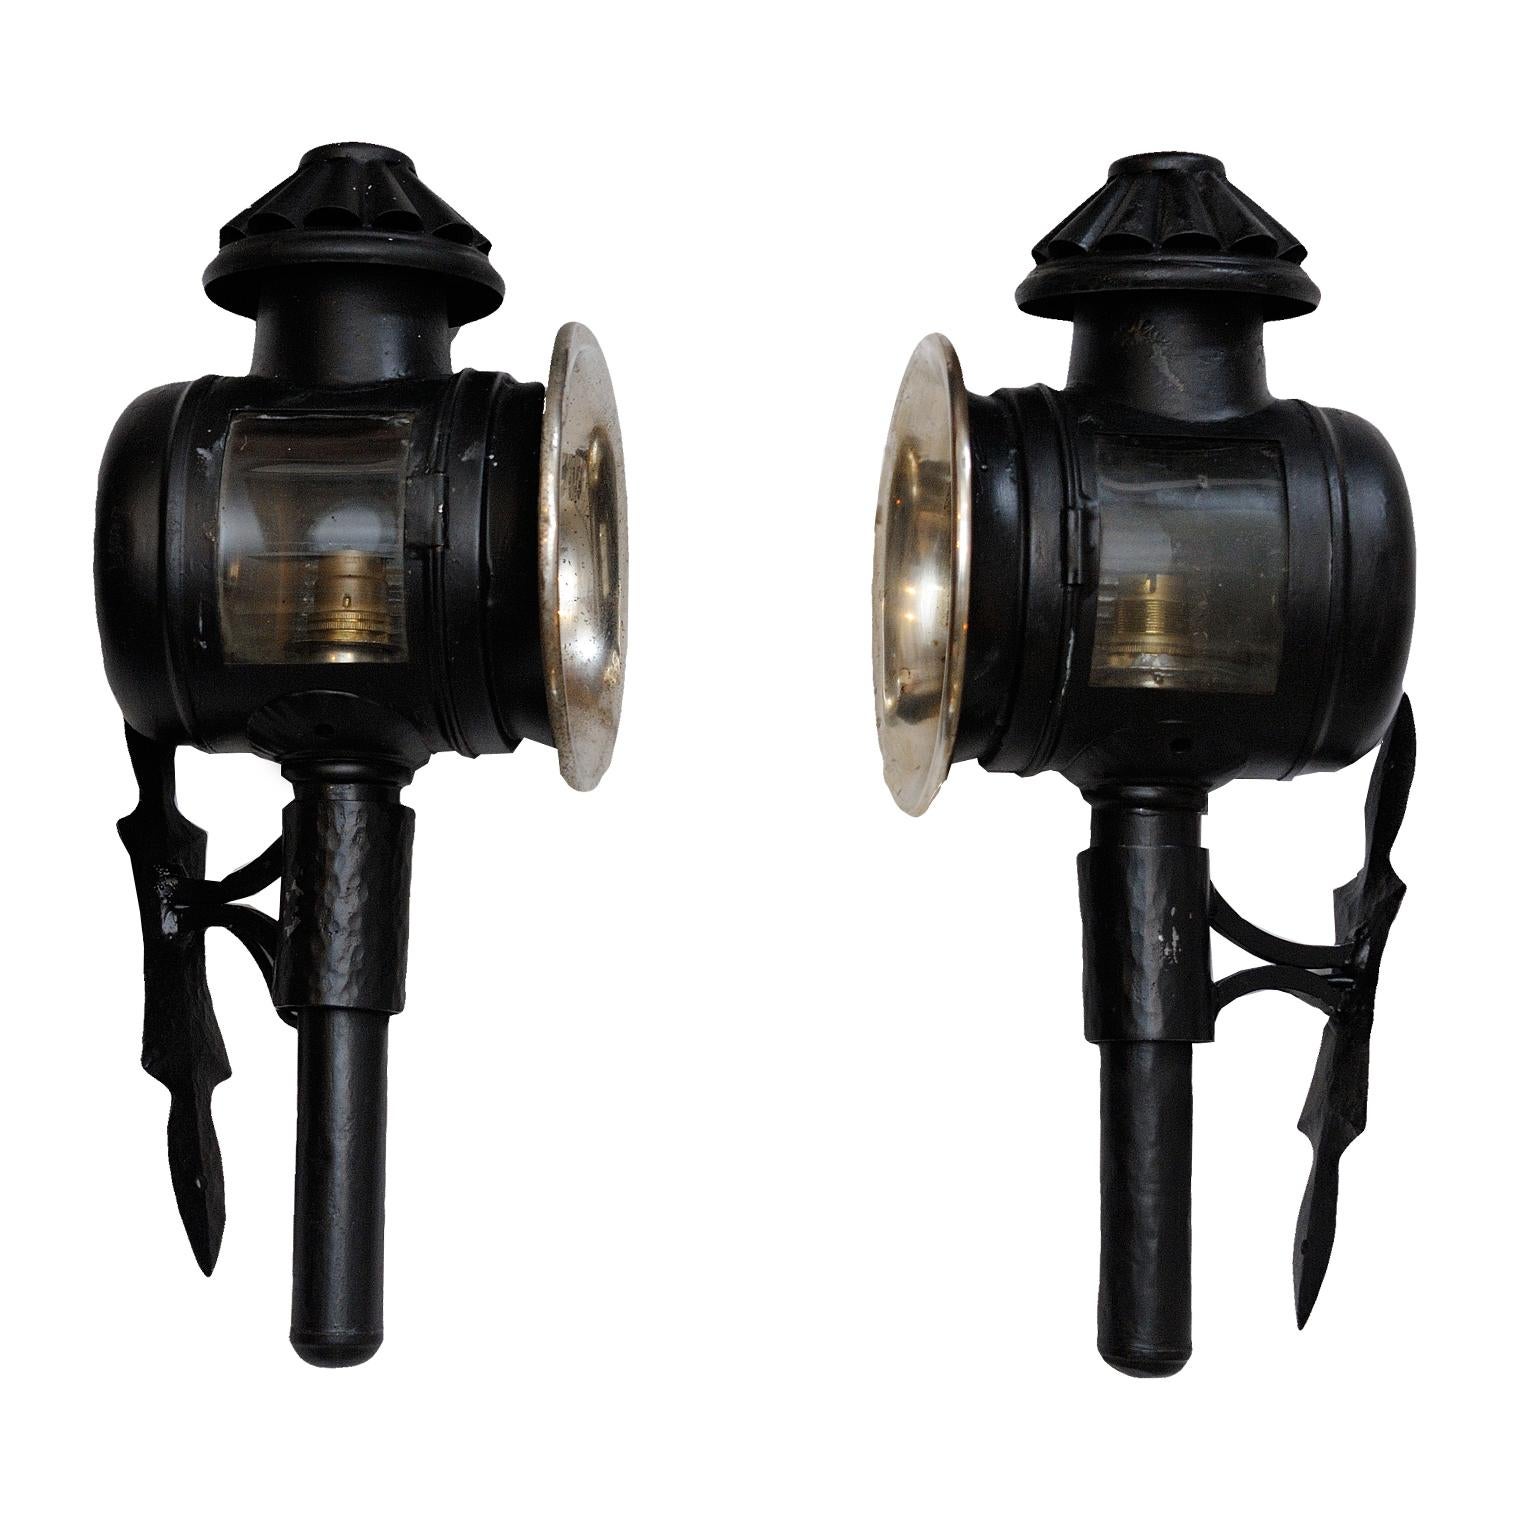 A pair of 19th century coach lamps with brackets, now converted to electricity and PAT tested, suitable for interior or exterior use, circa 1860.
Measures: Height 42cm (16.5